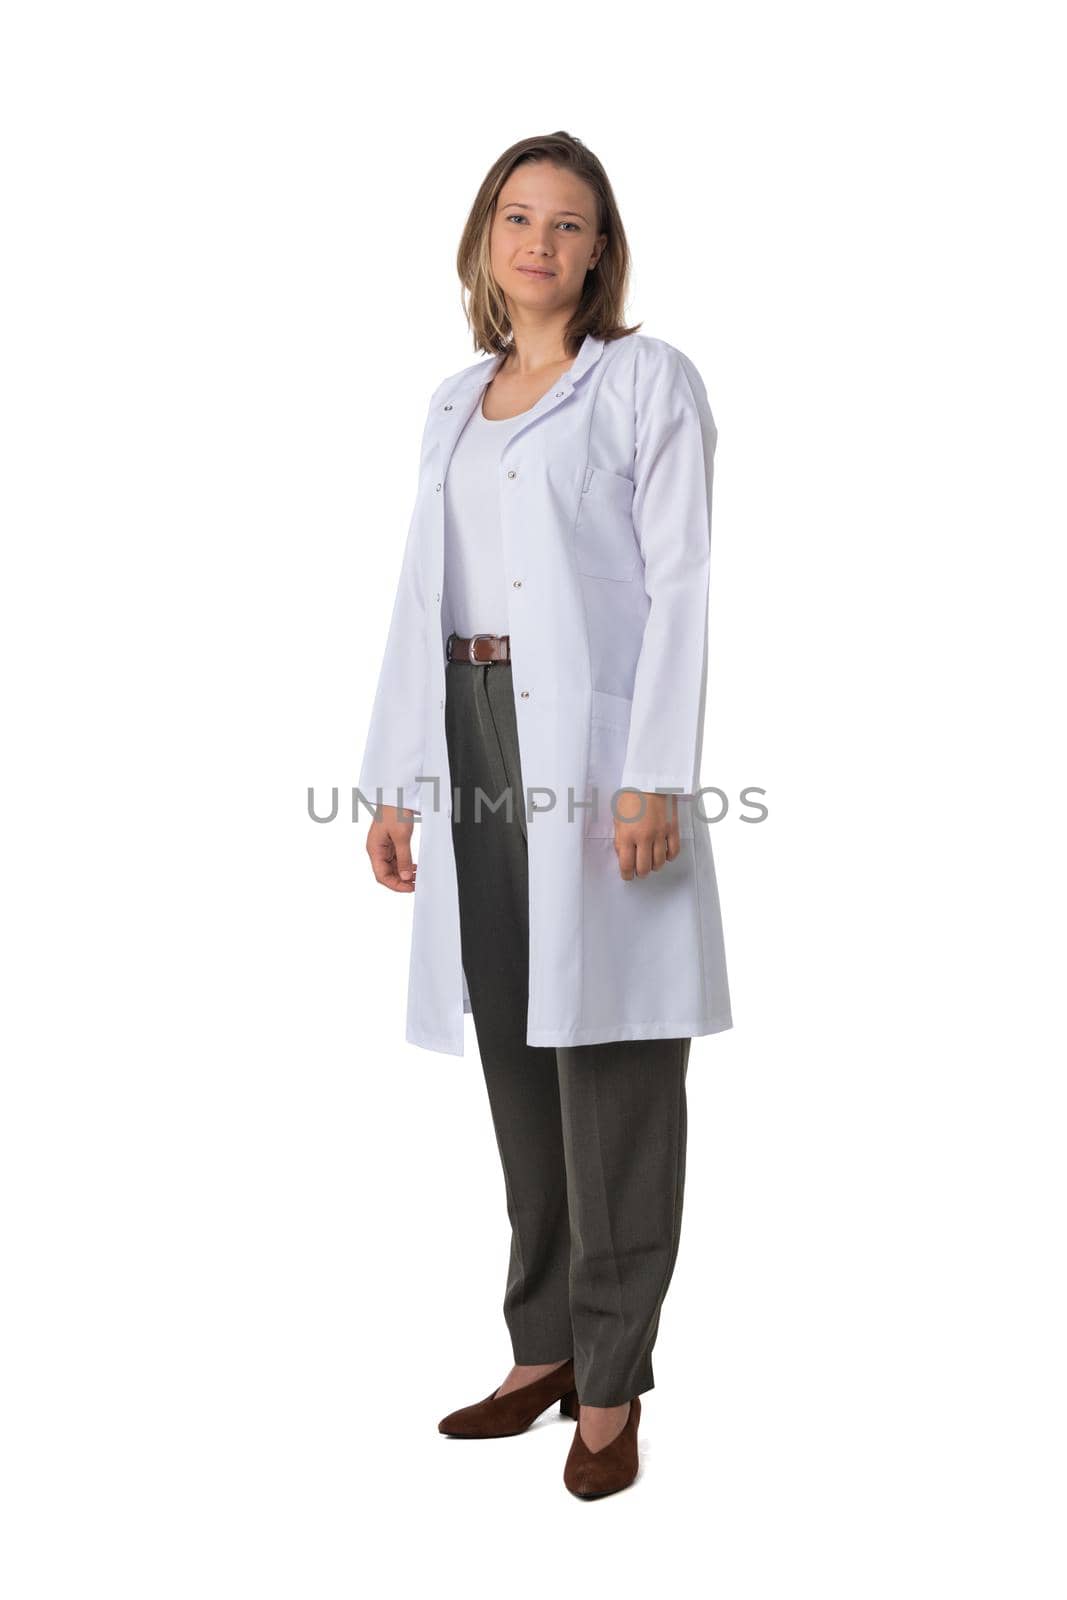 Female doctor isolated on white by ALotOfPeople